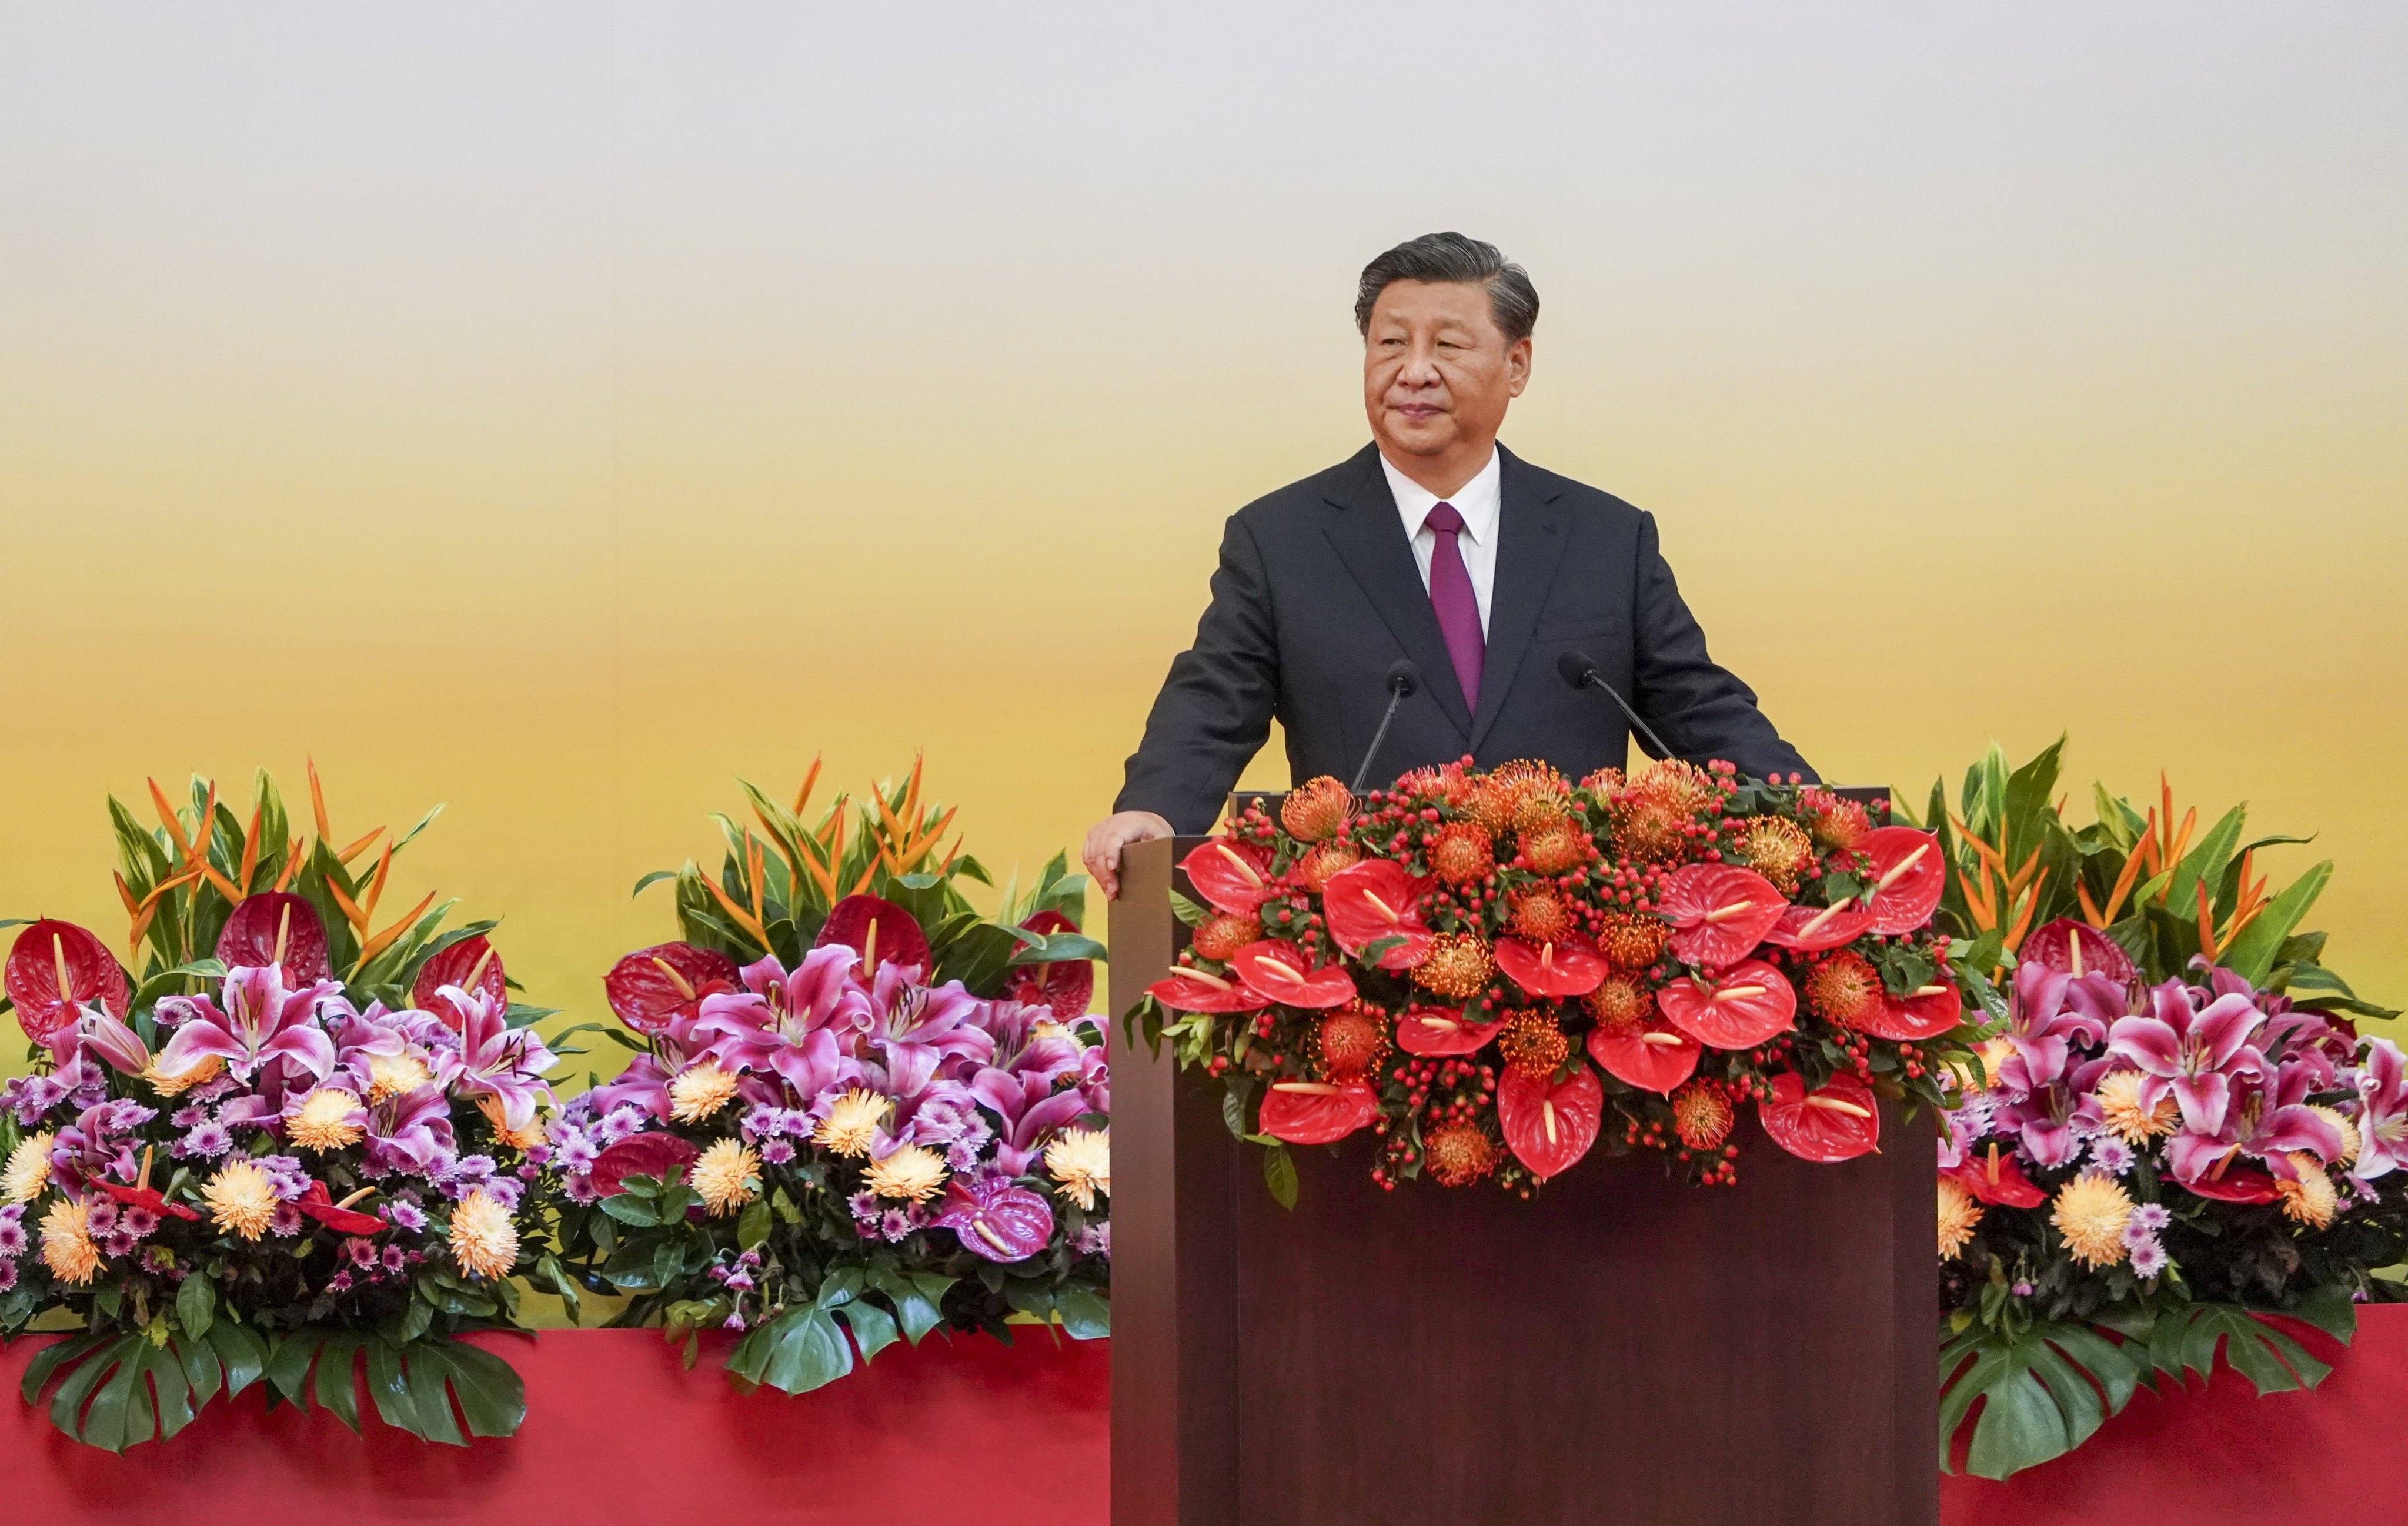 Chinese President Xi Jinping delivers a speech in Hong Kong at a gathering celebrating the 25th anniversary of the establishment of the special administrative region. Photo: Felix Wong